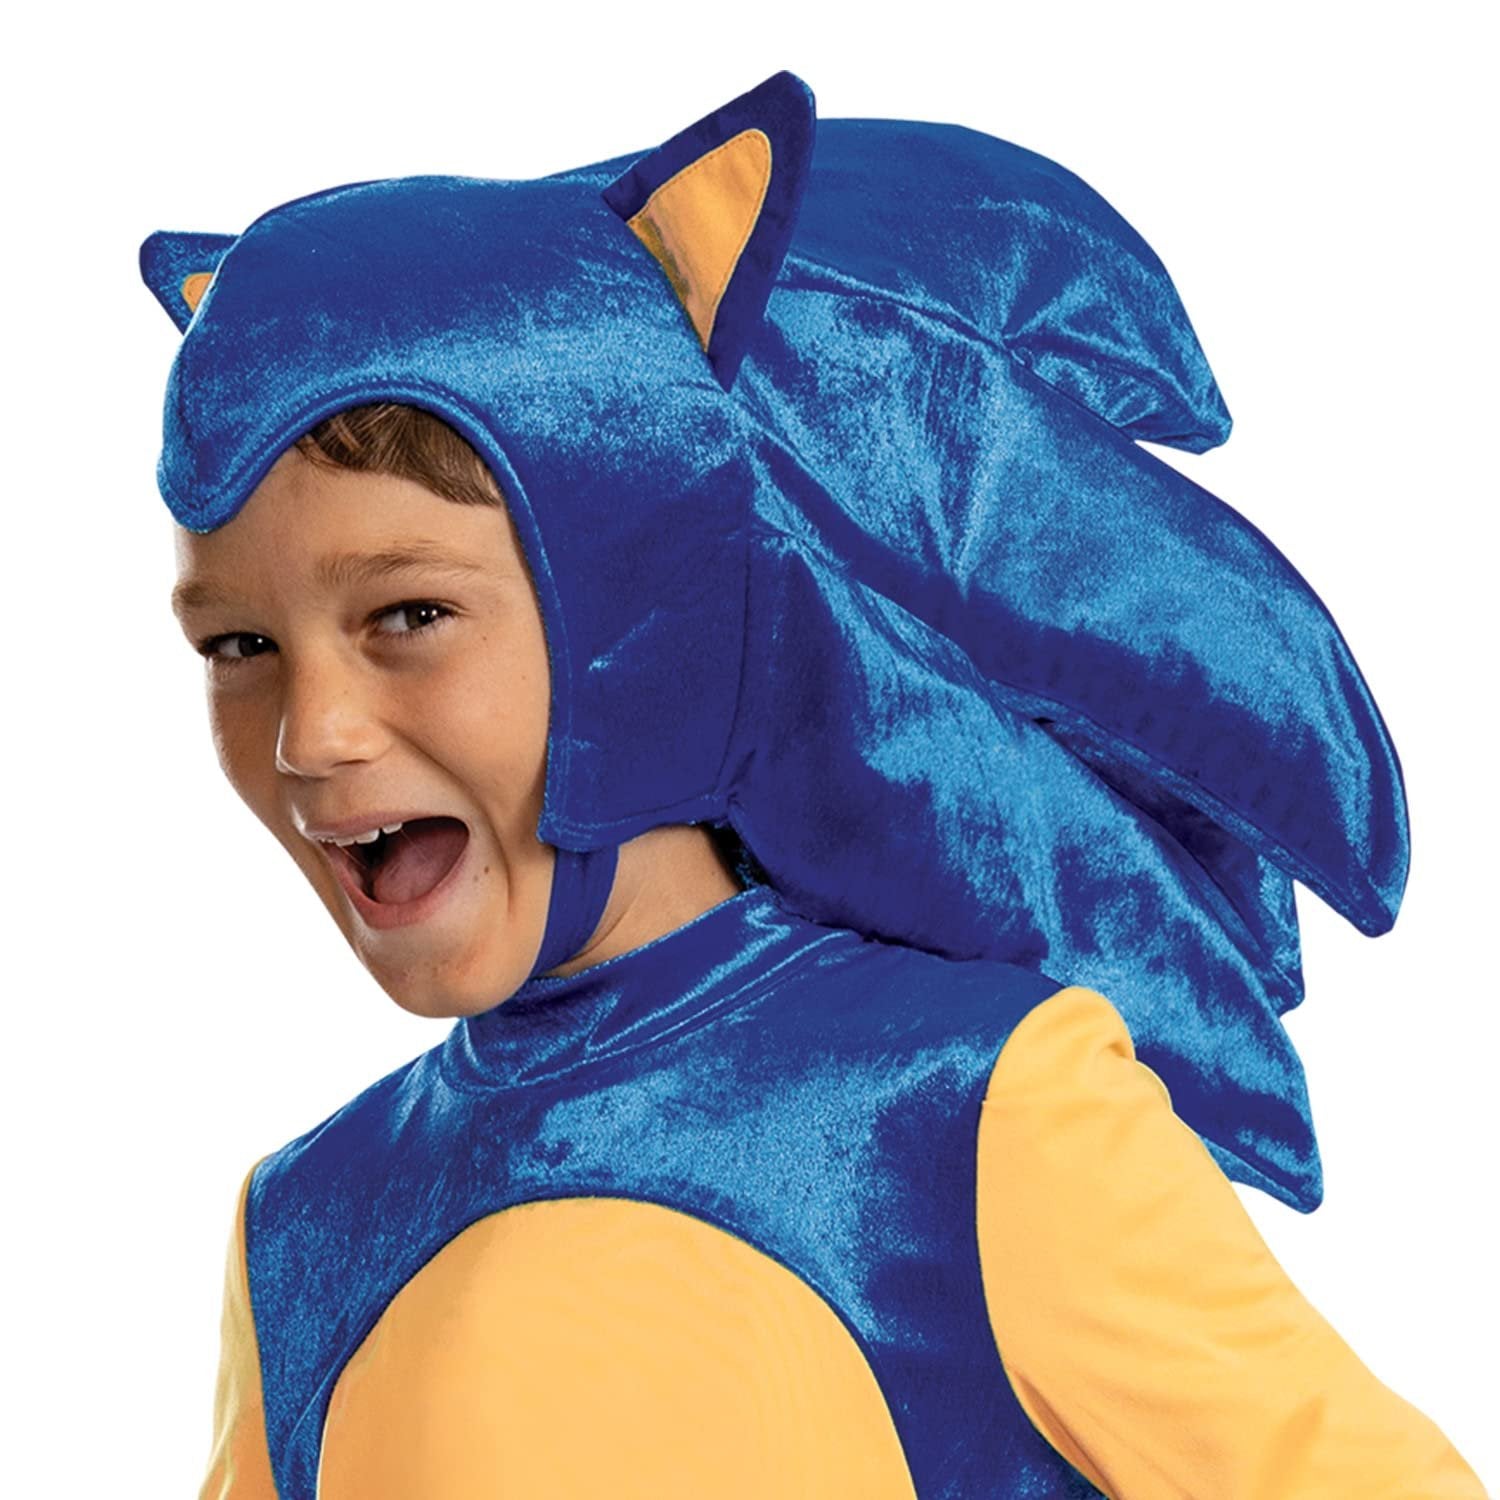 Disguise Deluxe Sonic Costume for Kids, Official Sonic Prime Costume and Headpiece, Size (7-8)